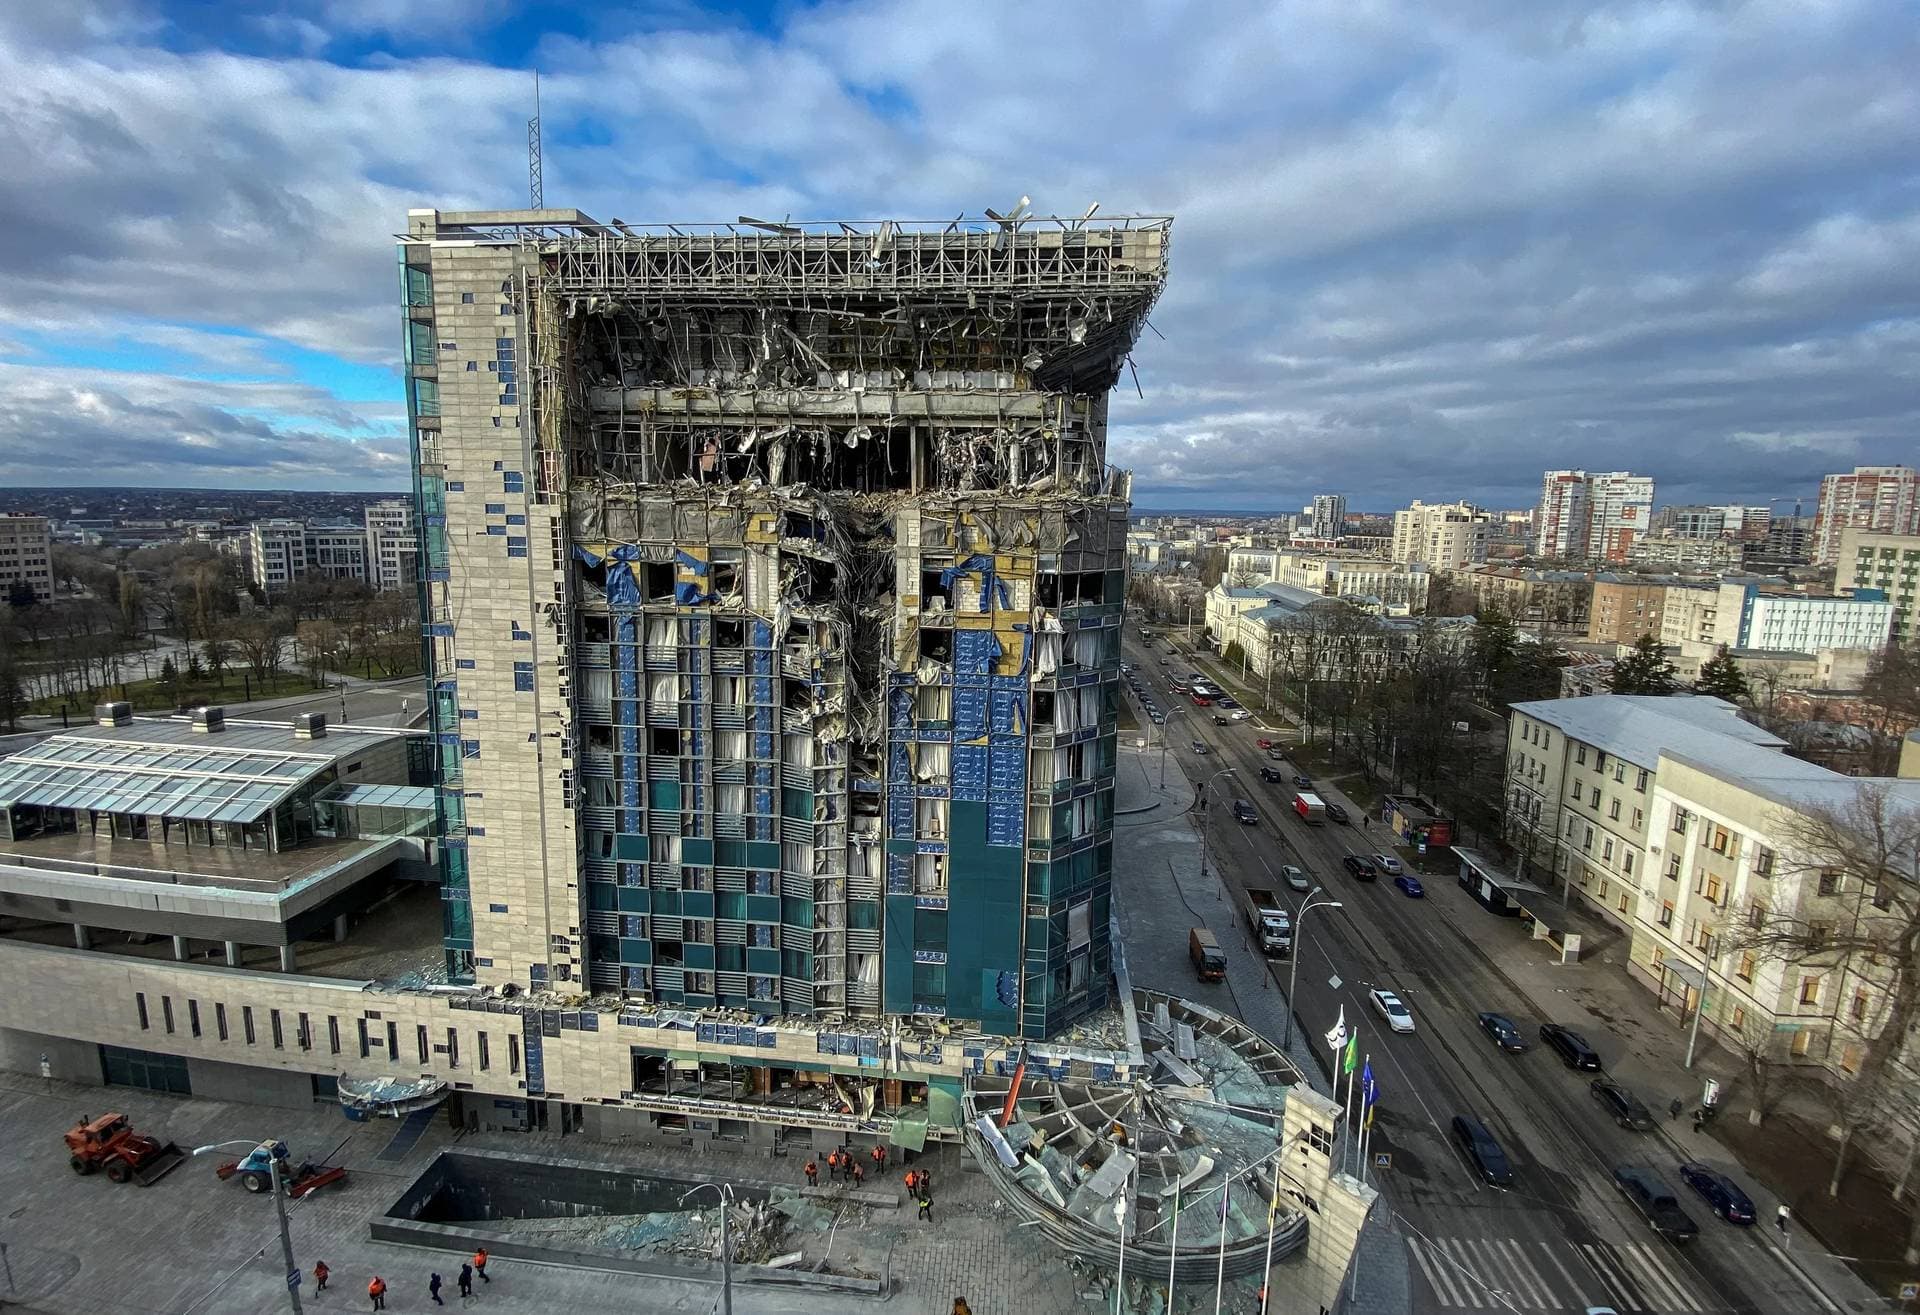 the Kharkiv Palace Hotel heavily damaged by a Russian missile strike in Kharkiv